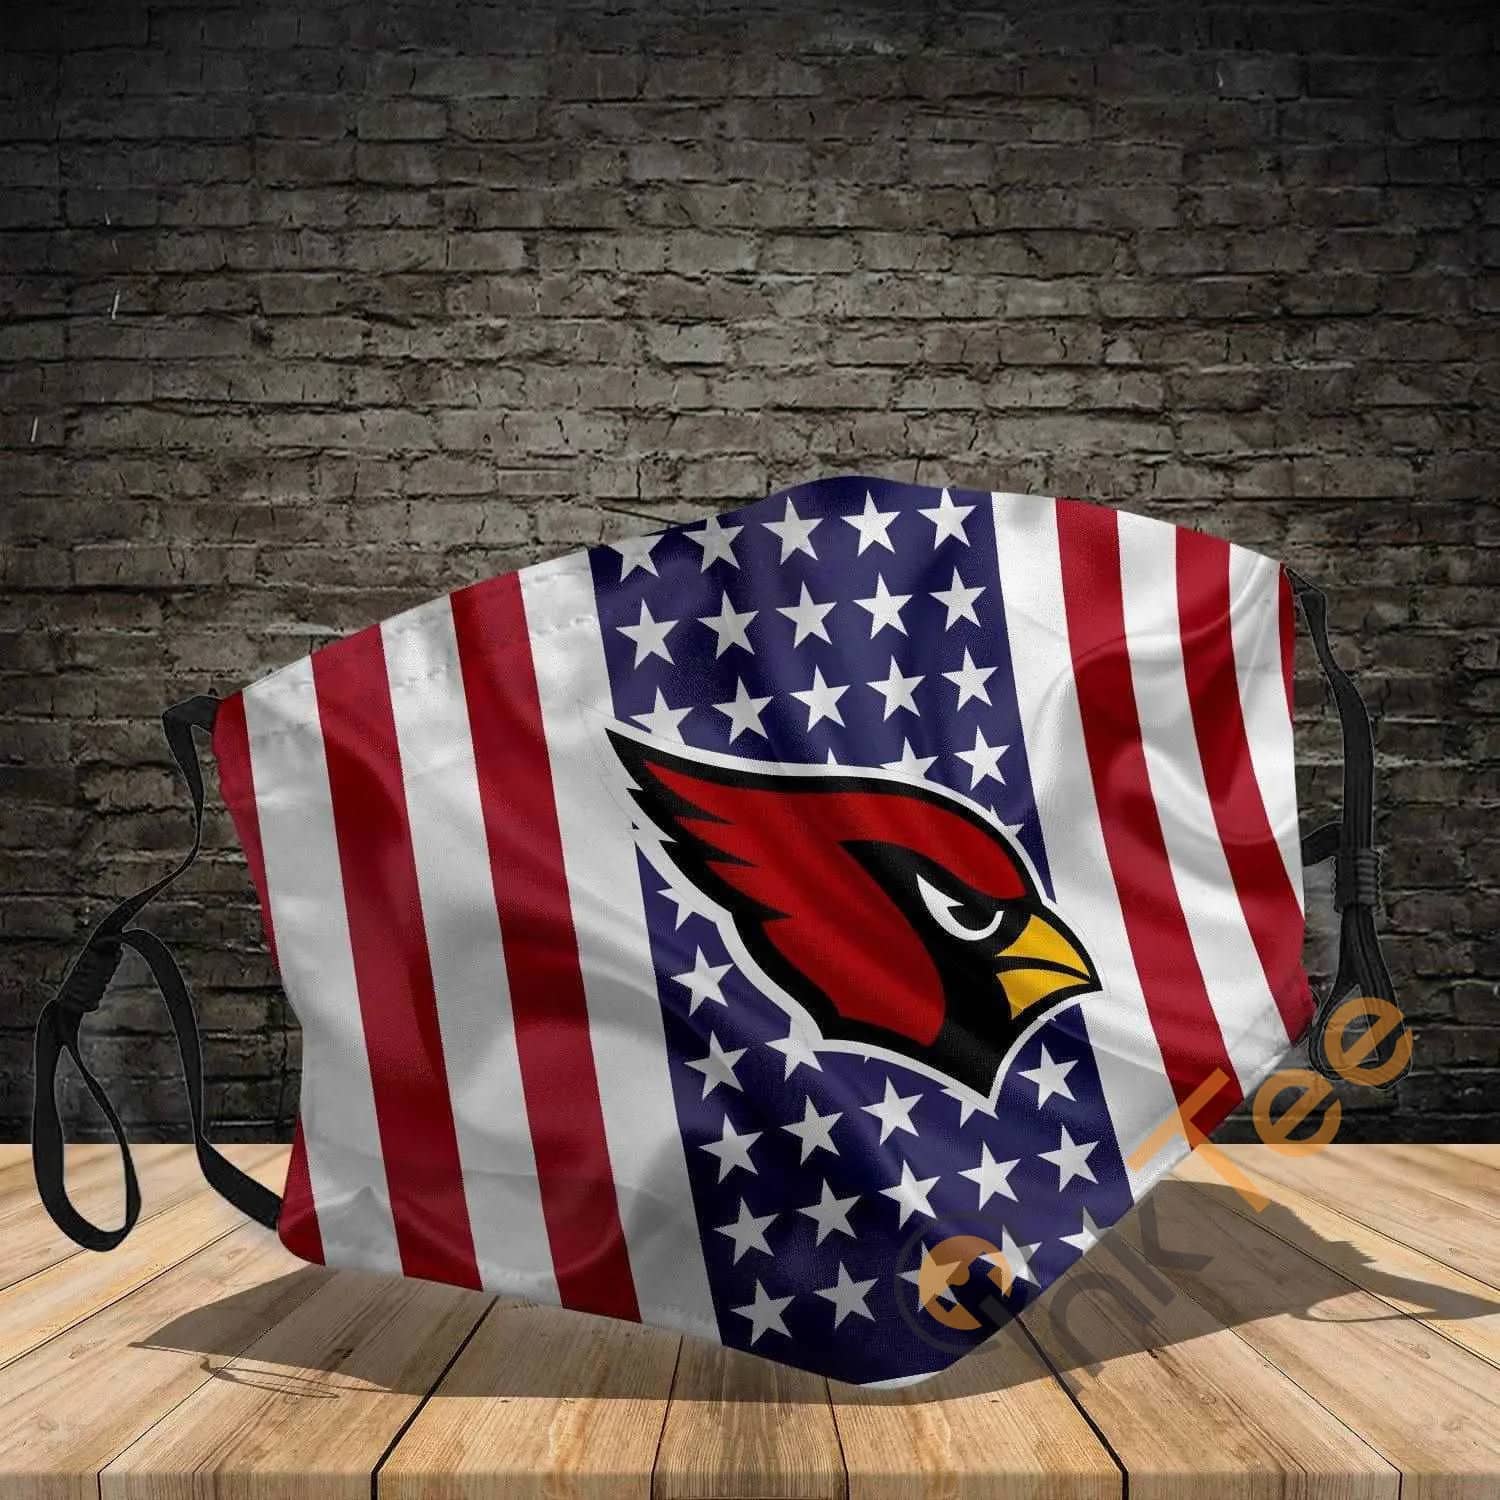 Arizona Cardinals Filter Activated Carbon Pm 2.5 Amazon Best Selling Sku1142 Face Mask